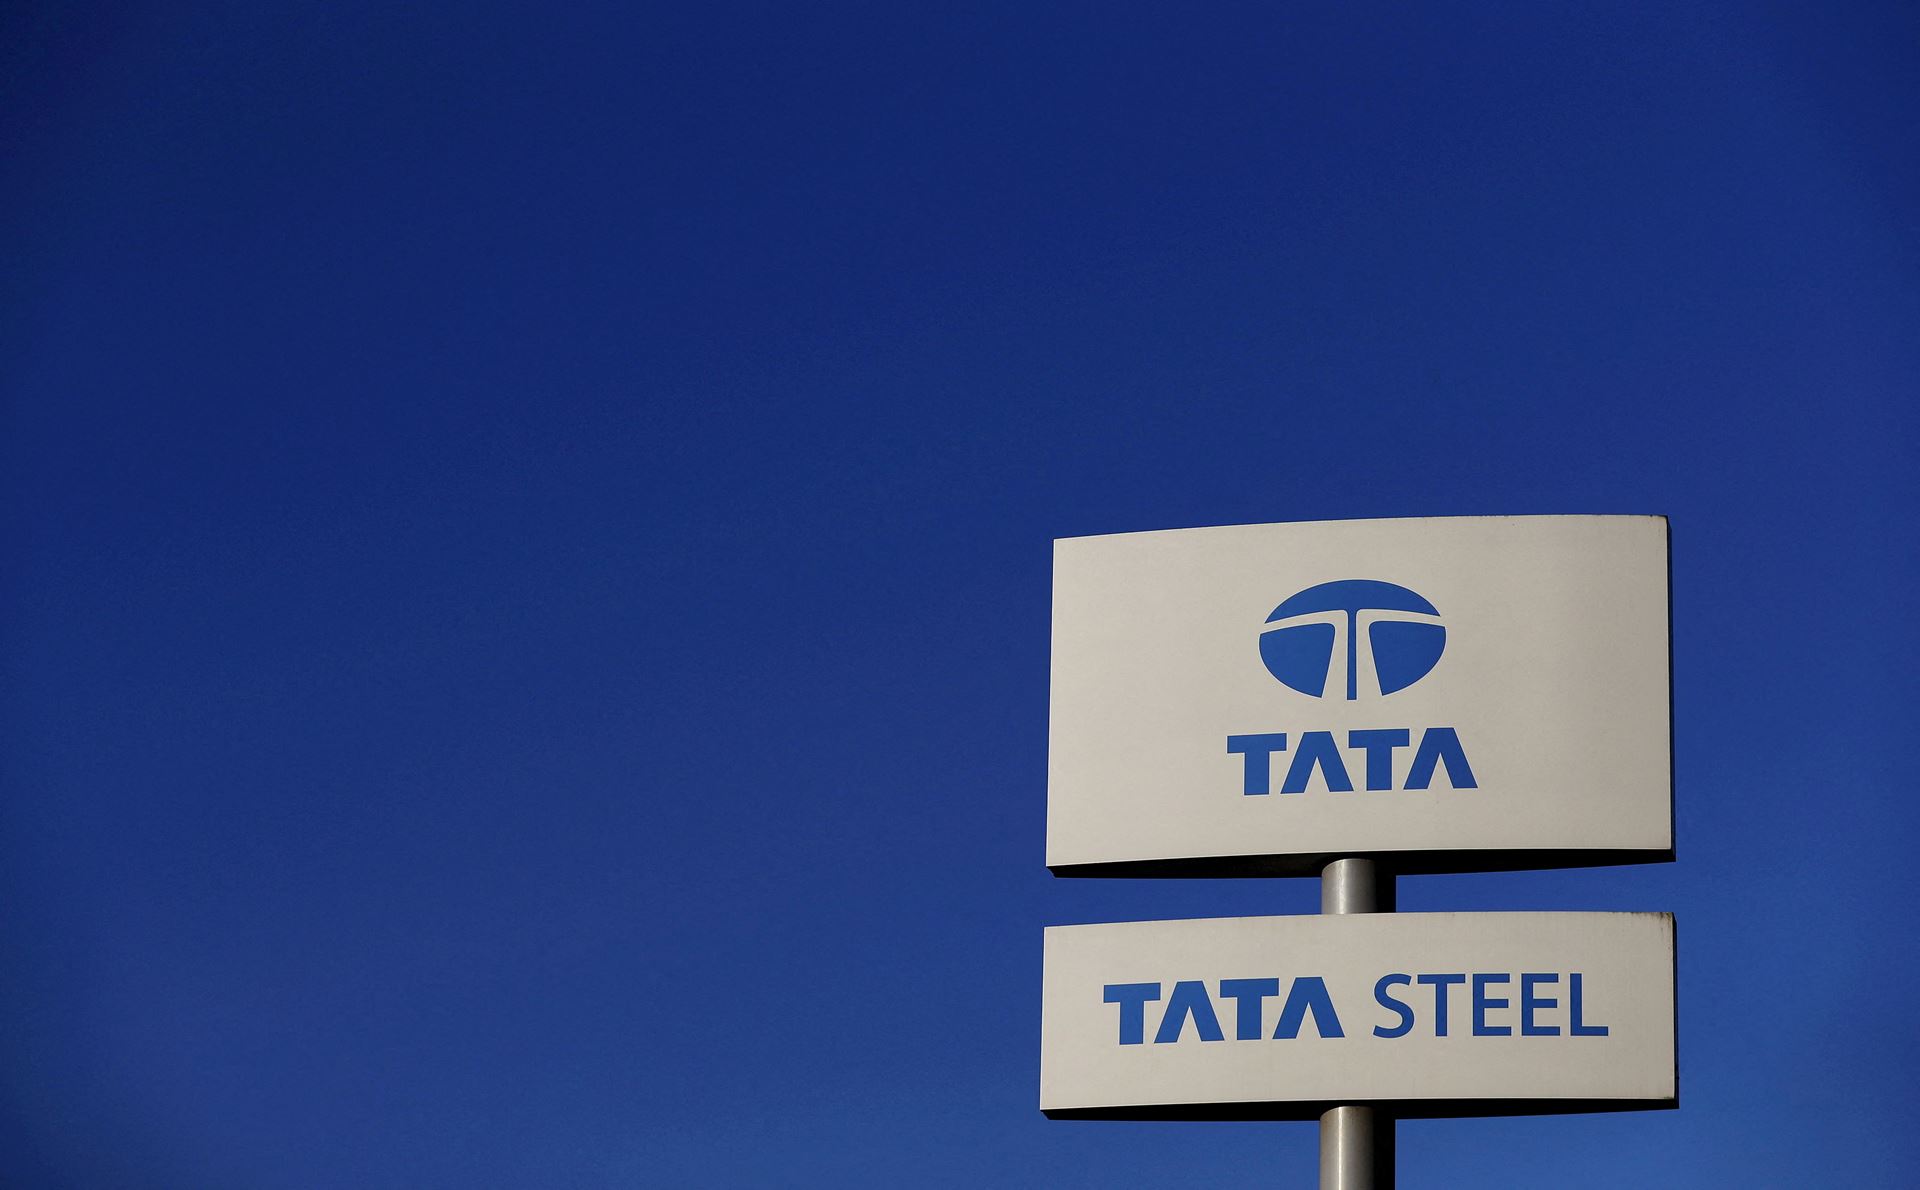 Tata Steel plans to build a new plant in India